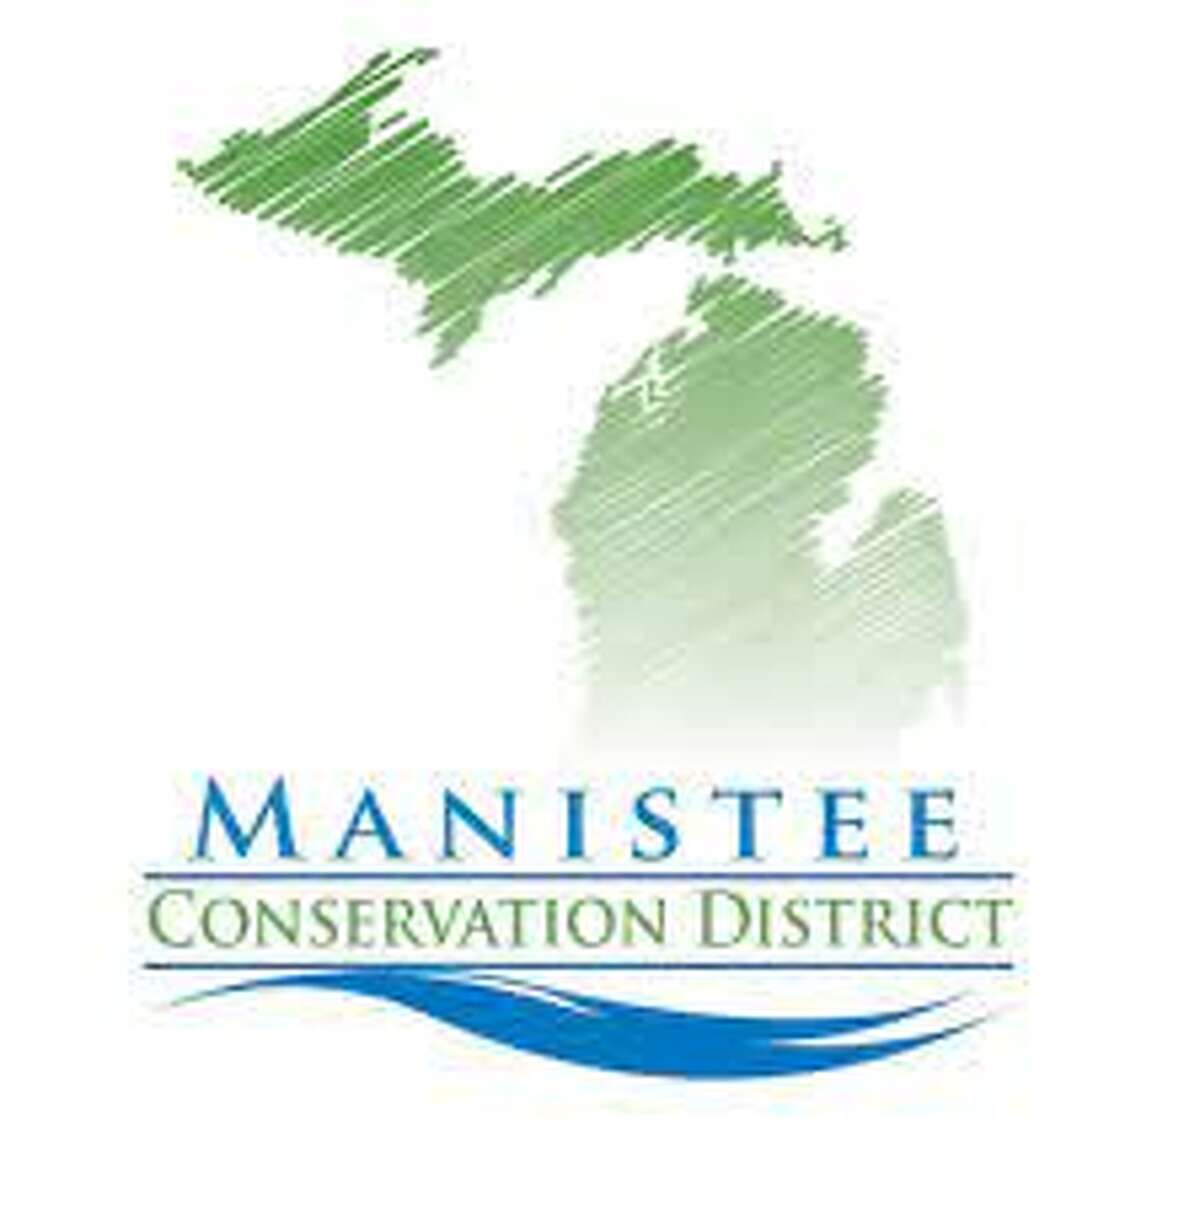 Manistee Conservation District